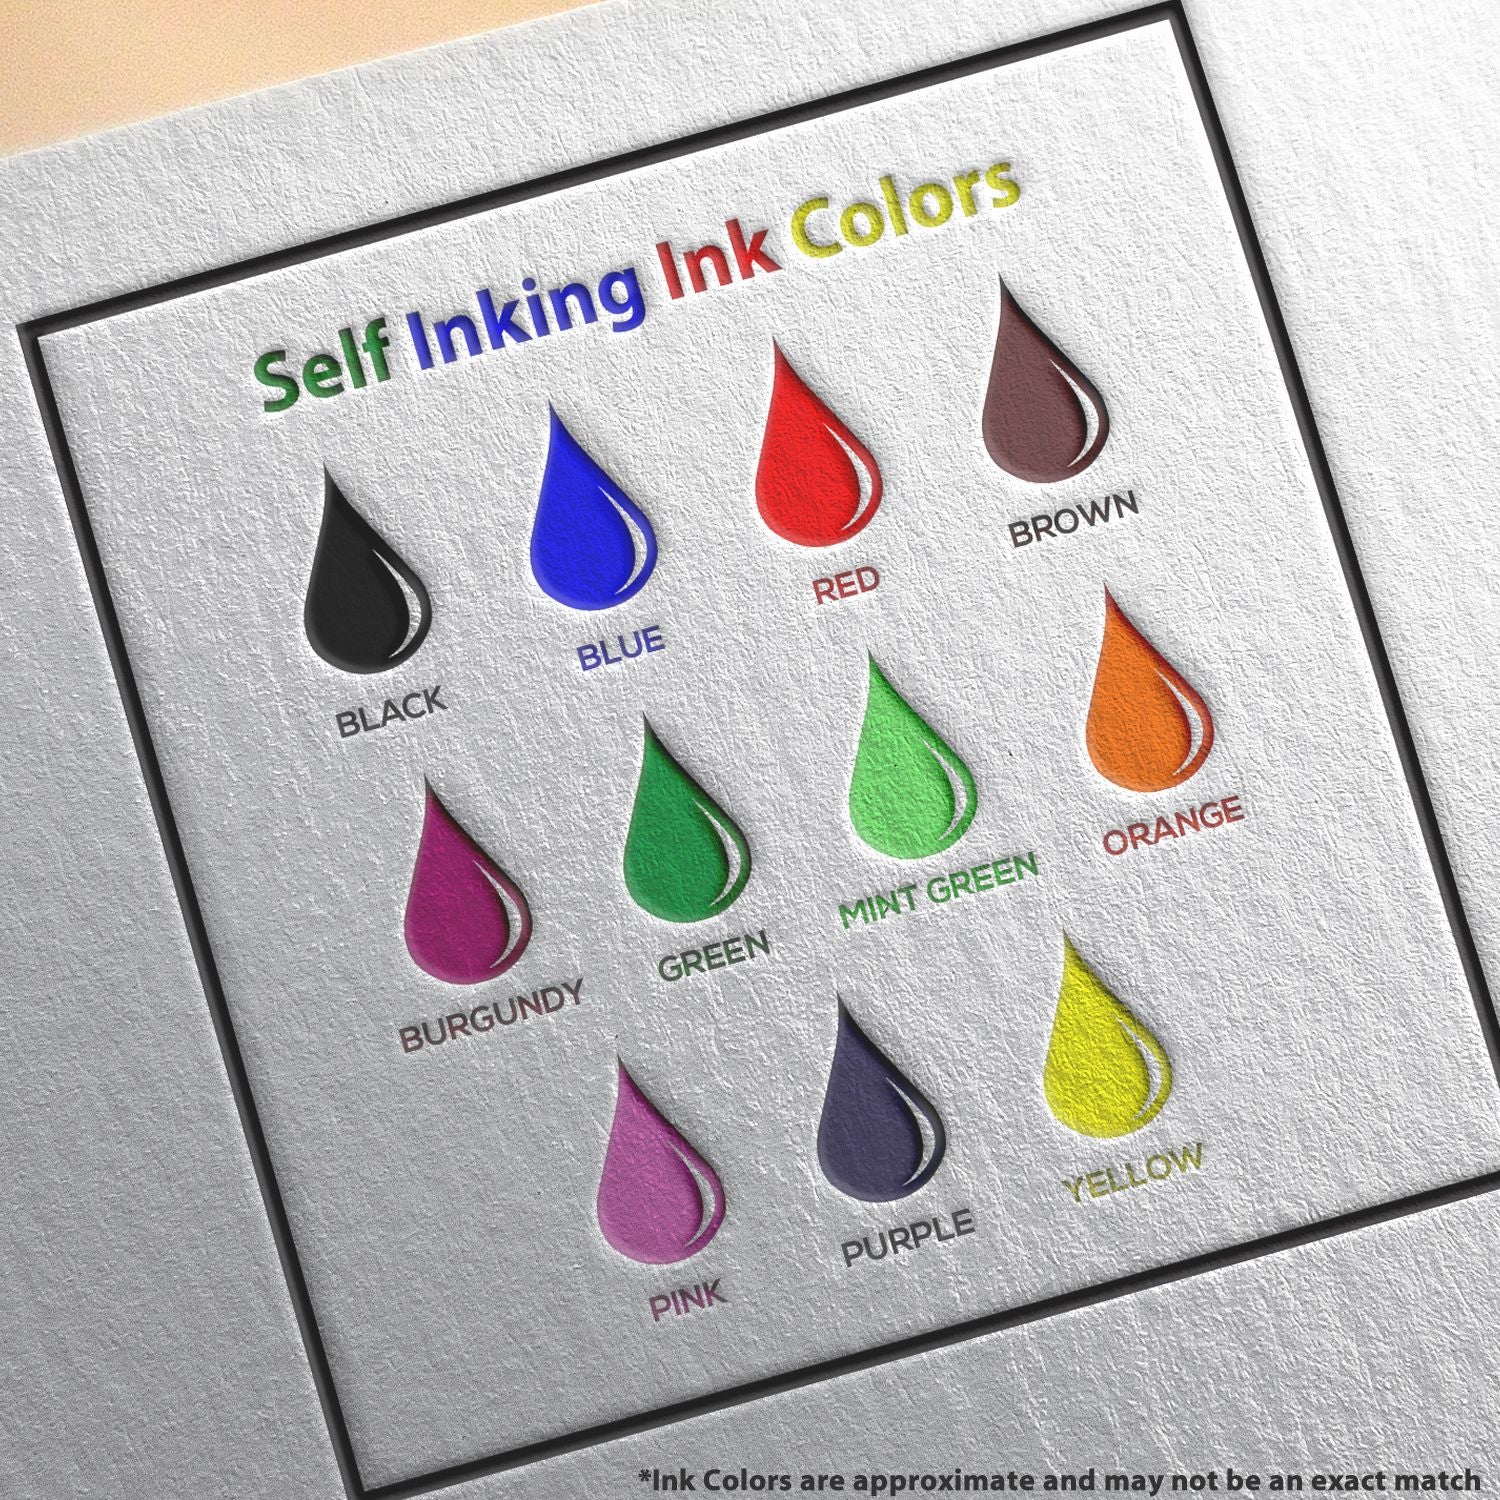 A picture showing the different ink colors or hues available for the Self-Inking South Dakota PE Stamp product.